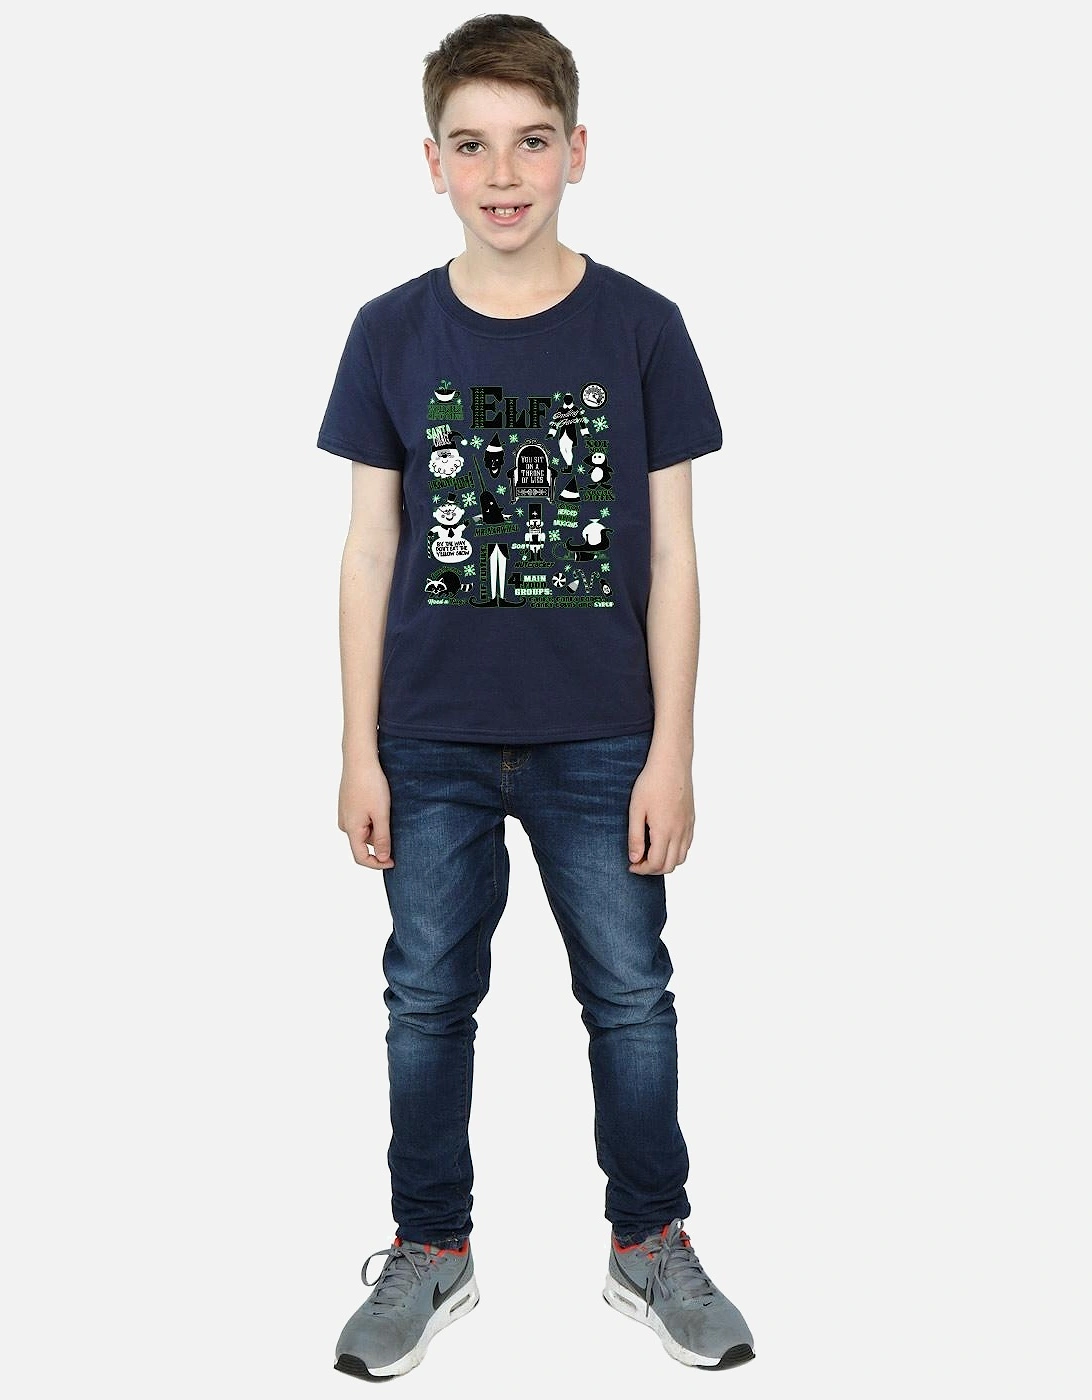 Boys Infographic Poster T-Shirt